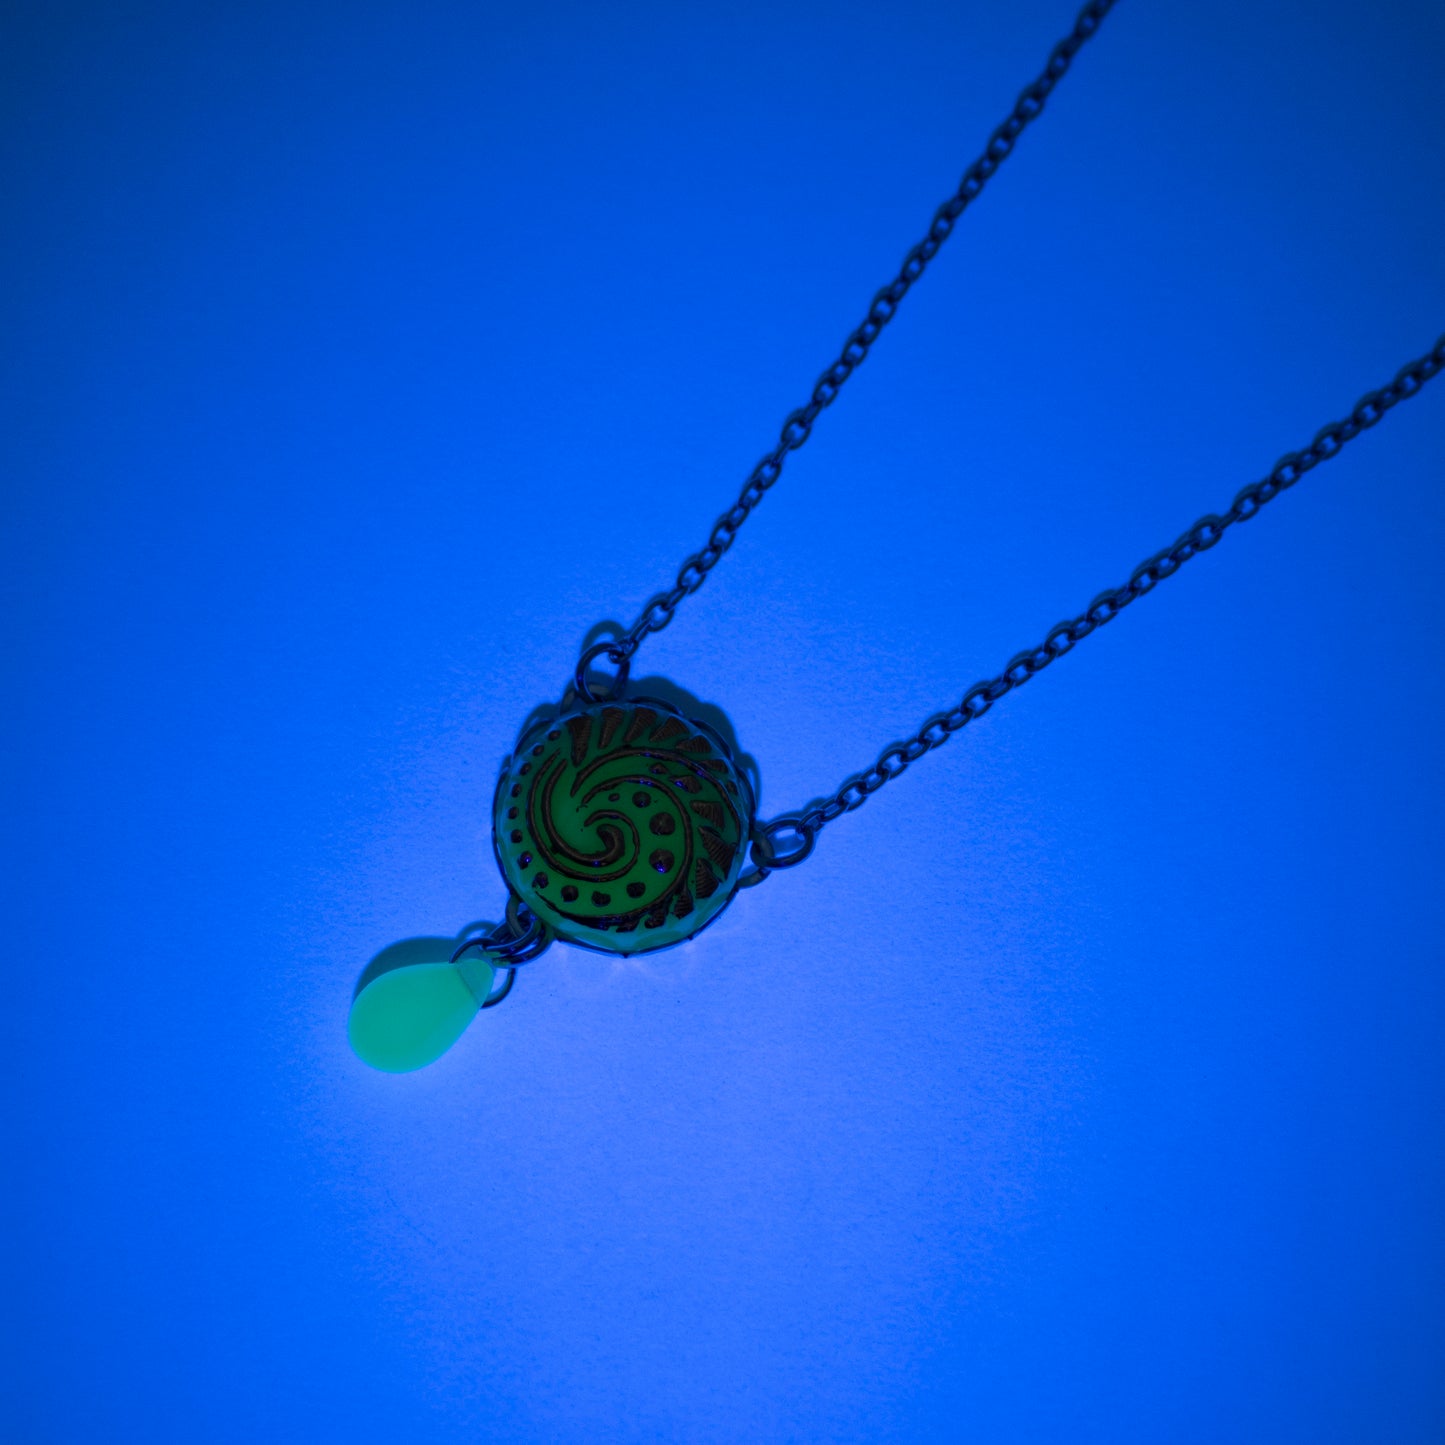 Button pendant necklace. Uranium glass button in light turquoise color.  Uranium glass button contains 2% uranium dioxide. This small amount in the glass allows it to fluoresce (glow) green under a black light and is also safe to wear.